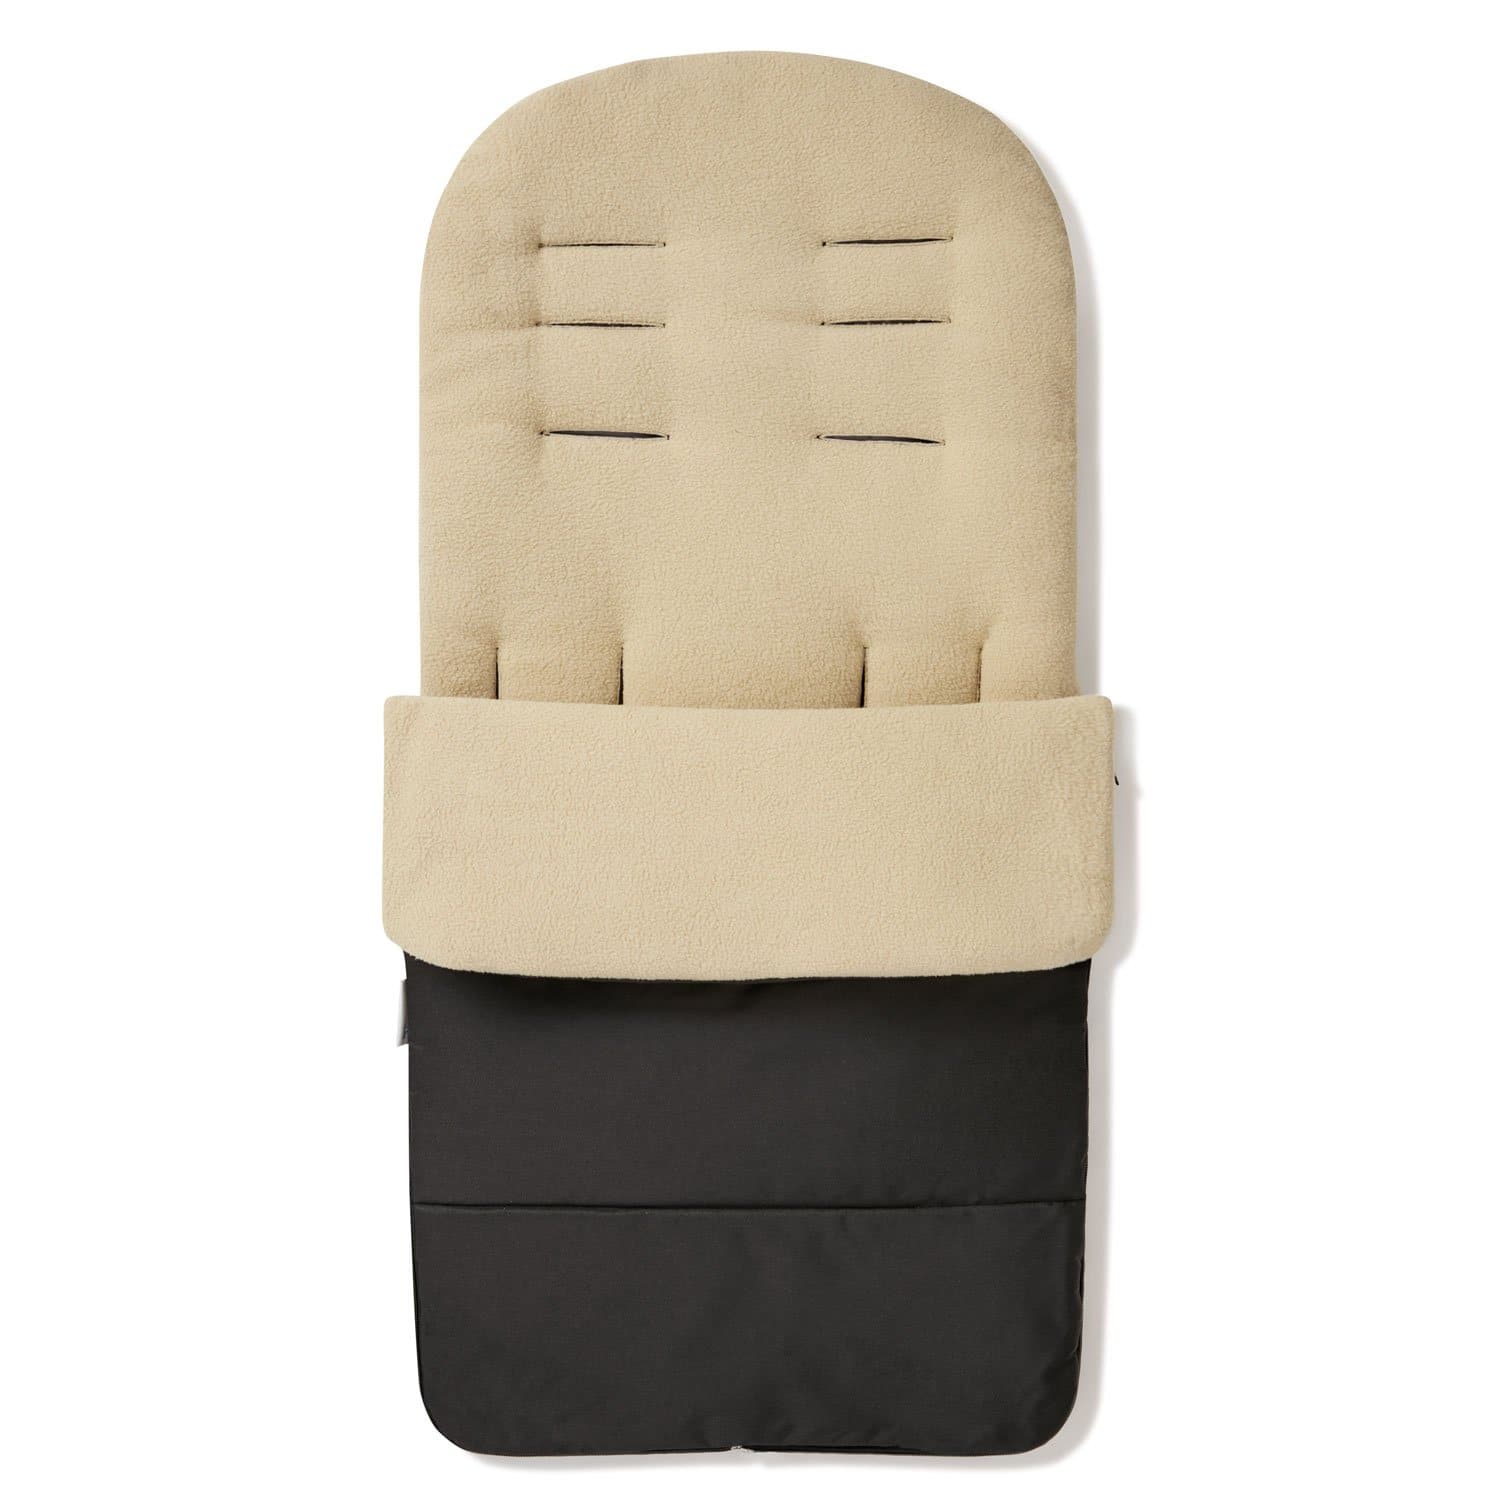 Premium Footmuff / Cosy Toes Compatible with NeoNato - Desert Sand / Fits All Models | For Your Little One